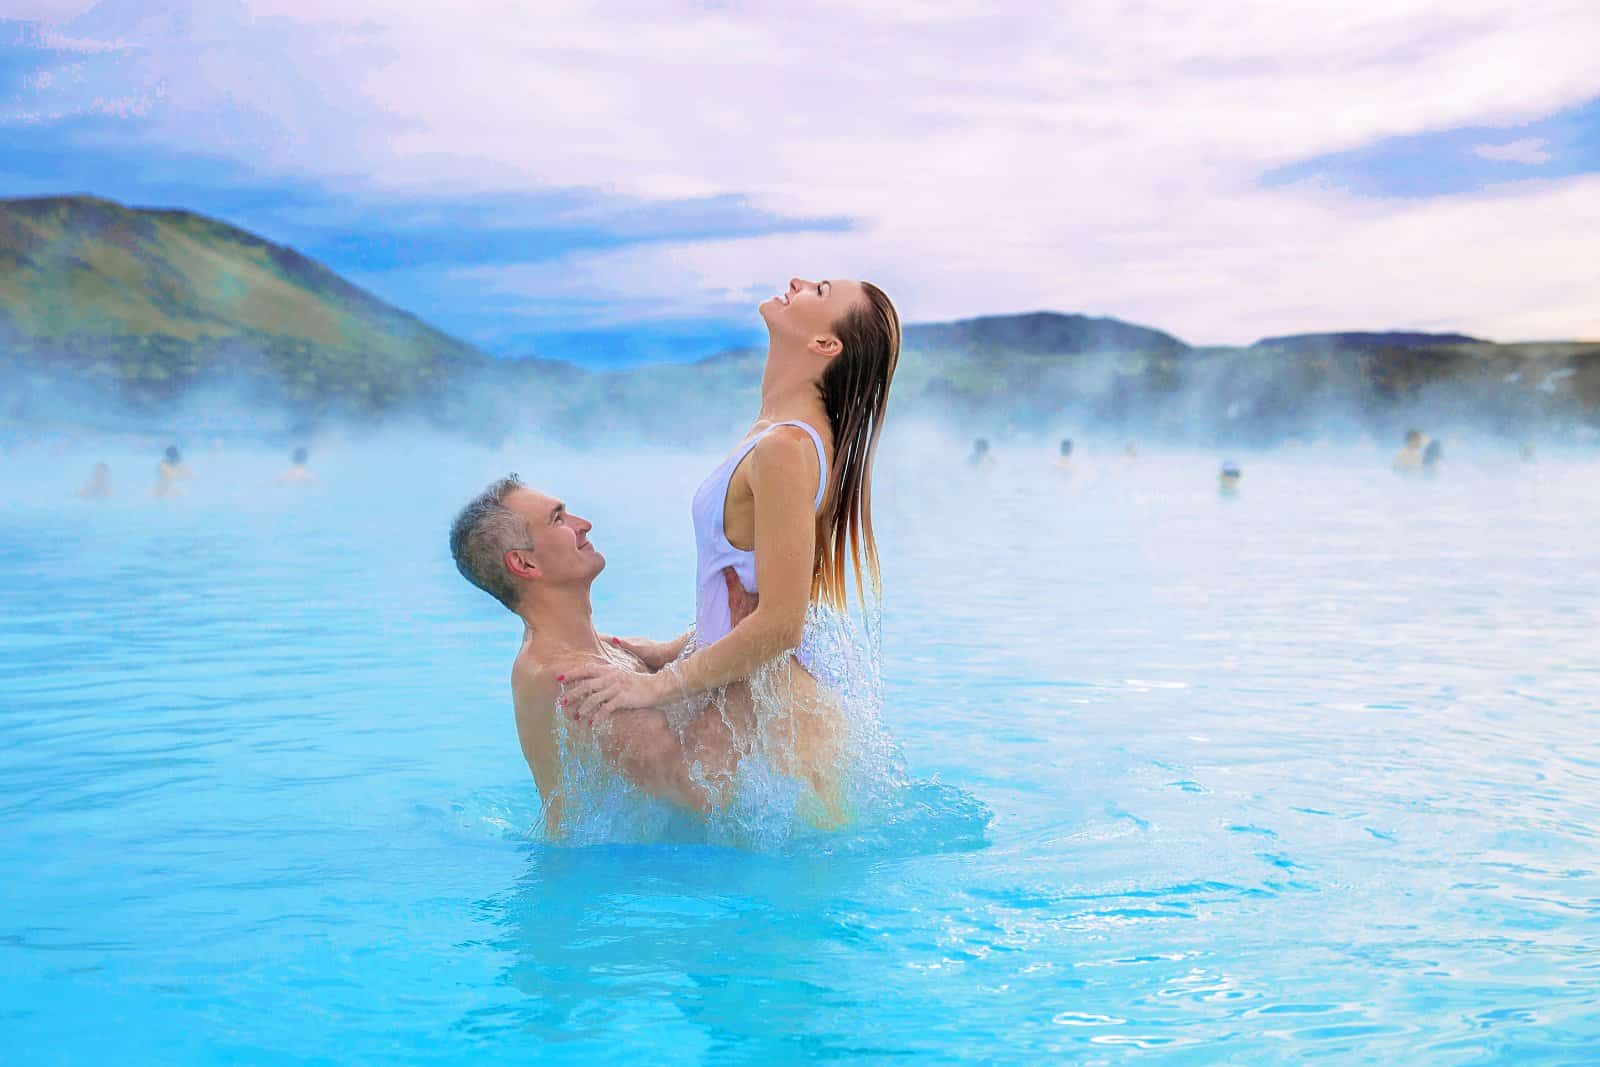 <p class="wp-caption-text">Image Credit: Shutterstock / Alla Laurent</p>  <p><span>The Blue Lagoon is one of Iceland’s most iconic destinations. It is renowned for its milky-blue geothermal waters against a stark lava field. Rich in minerals like silica and sulfur, the lagoon’s warm waters are believed to have healing properties, offering a unique spa experience. The Blue Lagoon is not just a natural wonder but also a feat of sustainability, utilizing the geothermal power that epitomizes Iceland’s innovative approach to nature.</span></p>